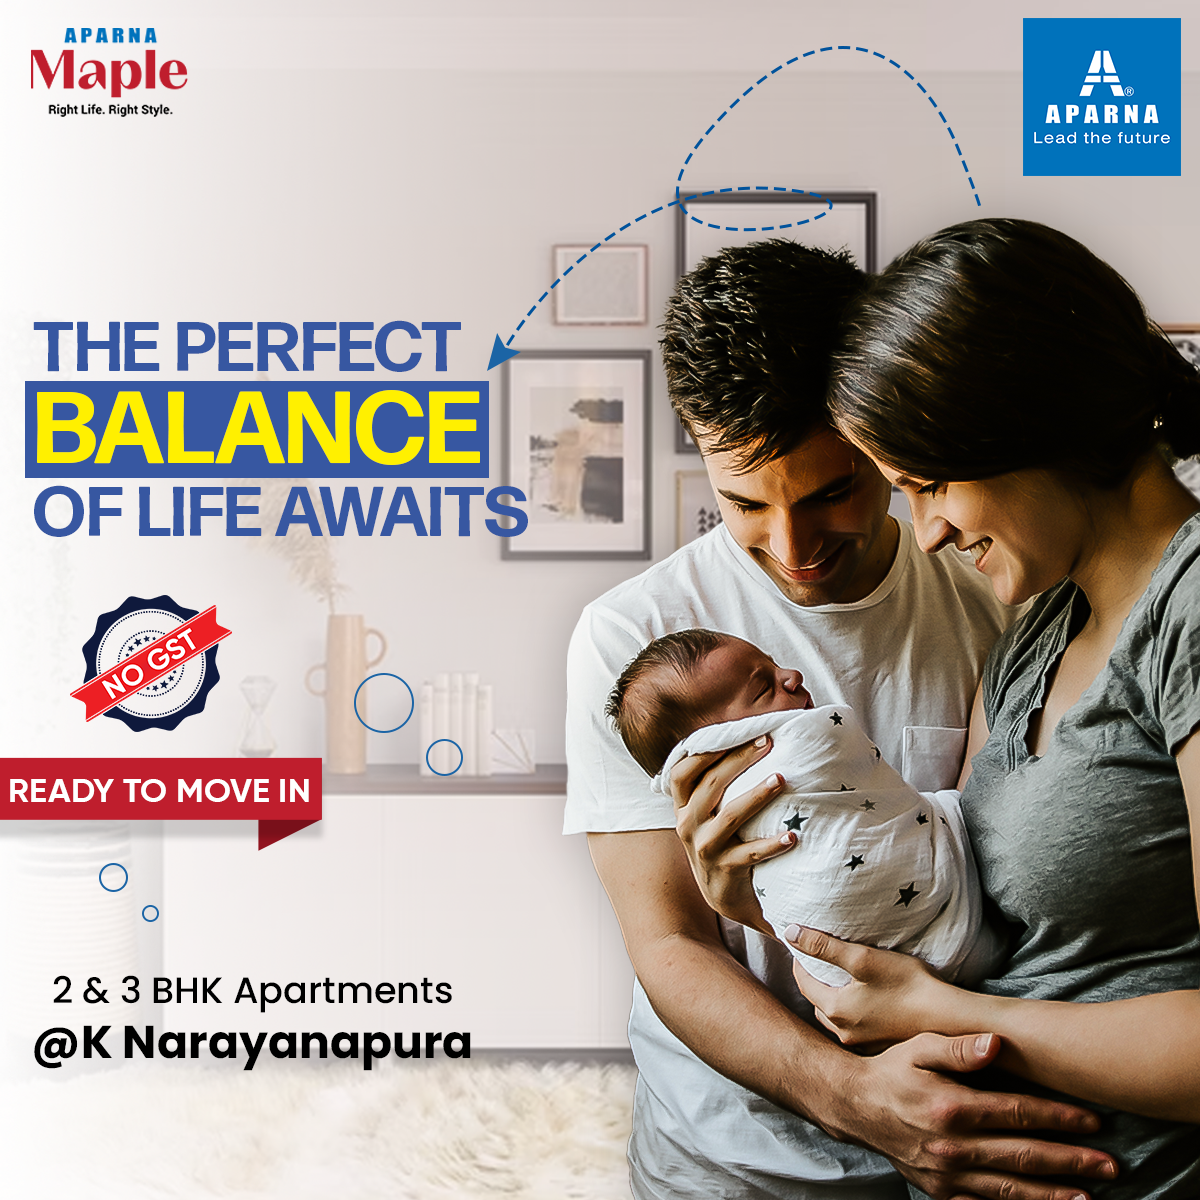 Ready to move in 2 and 3 BHK apartments at Aparna Maple in Bangalore Update